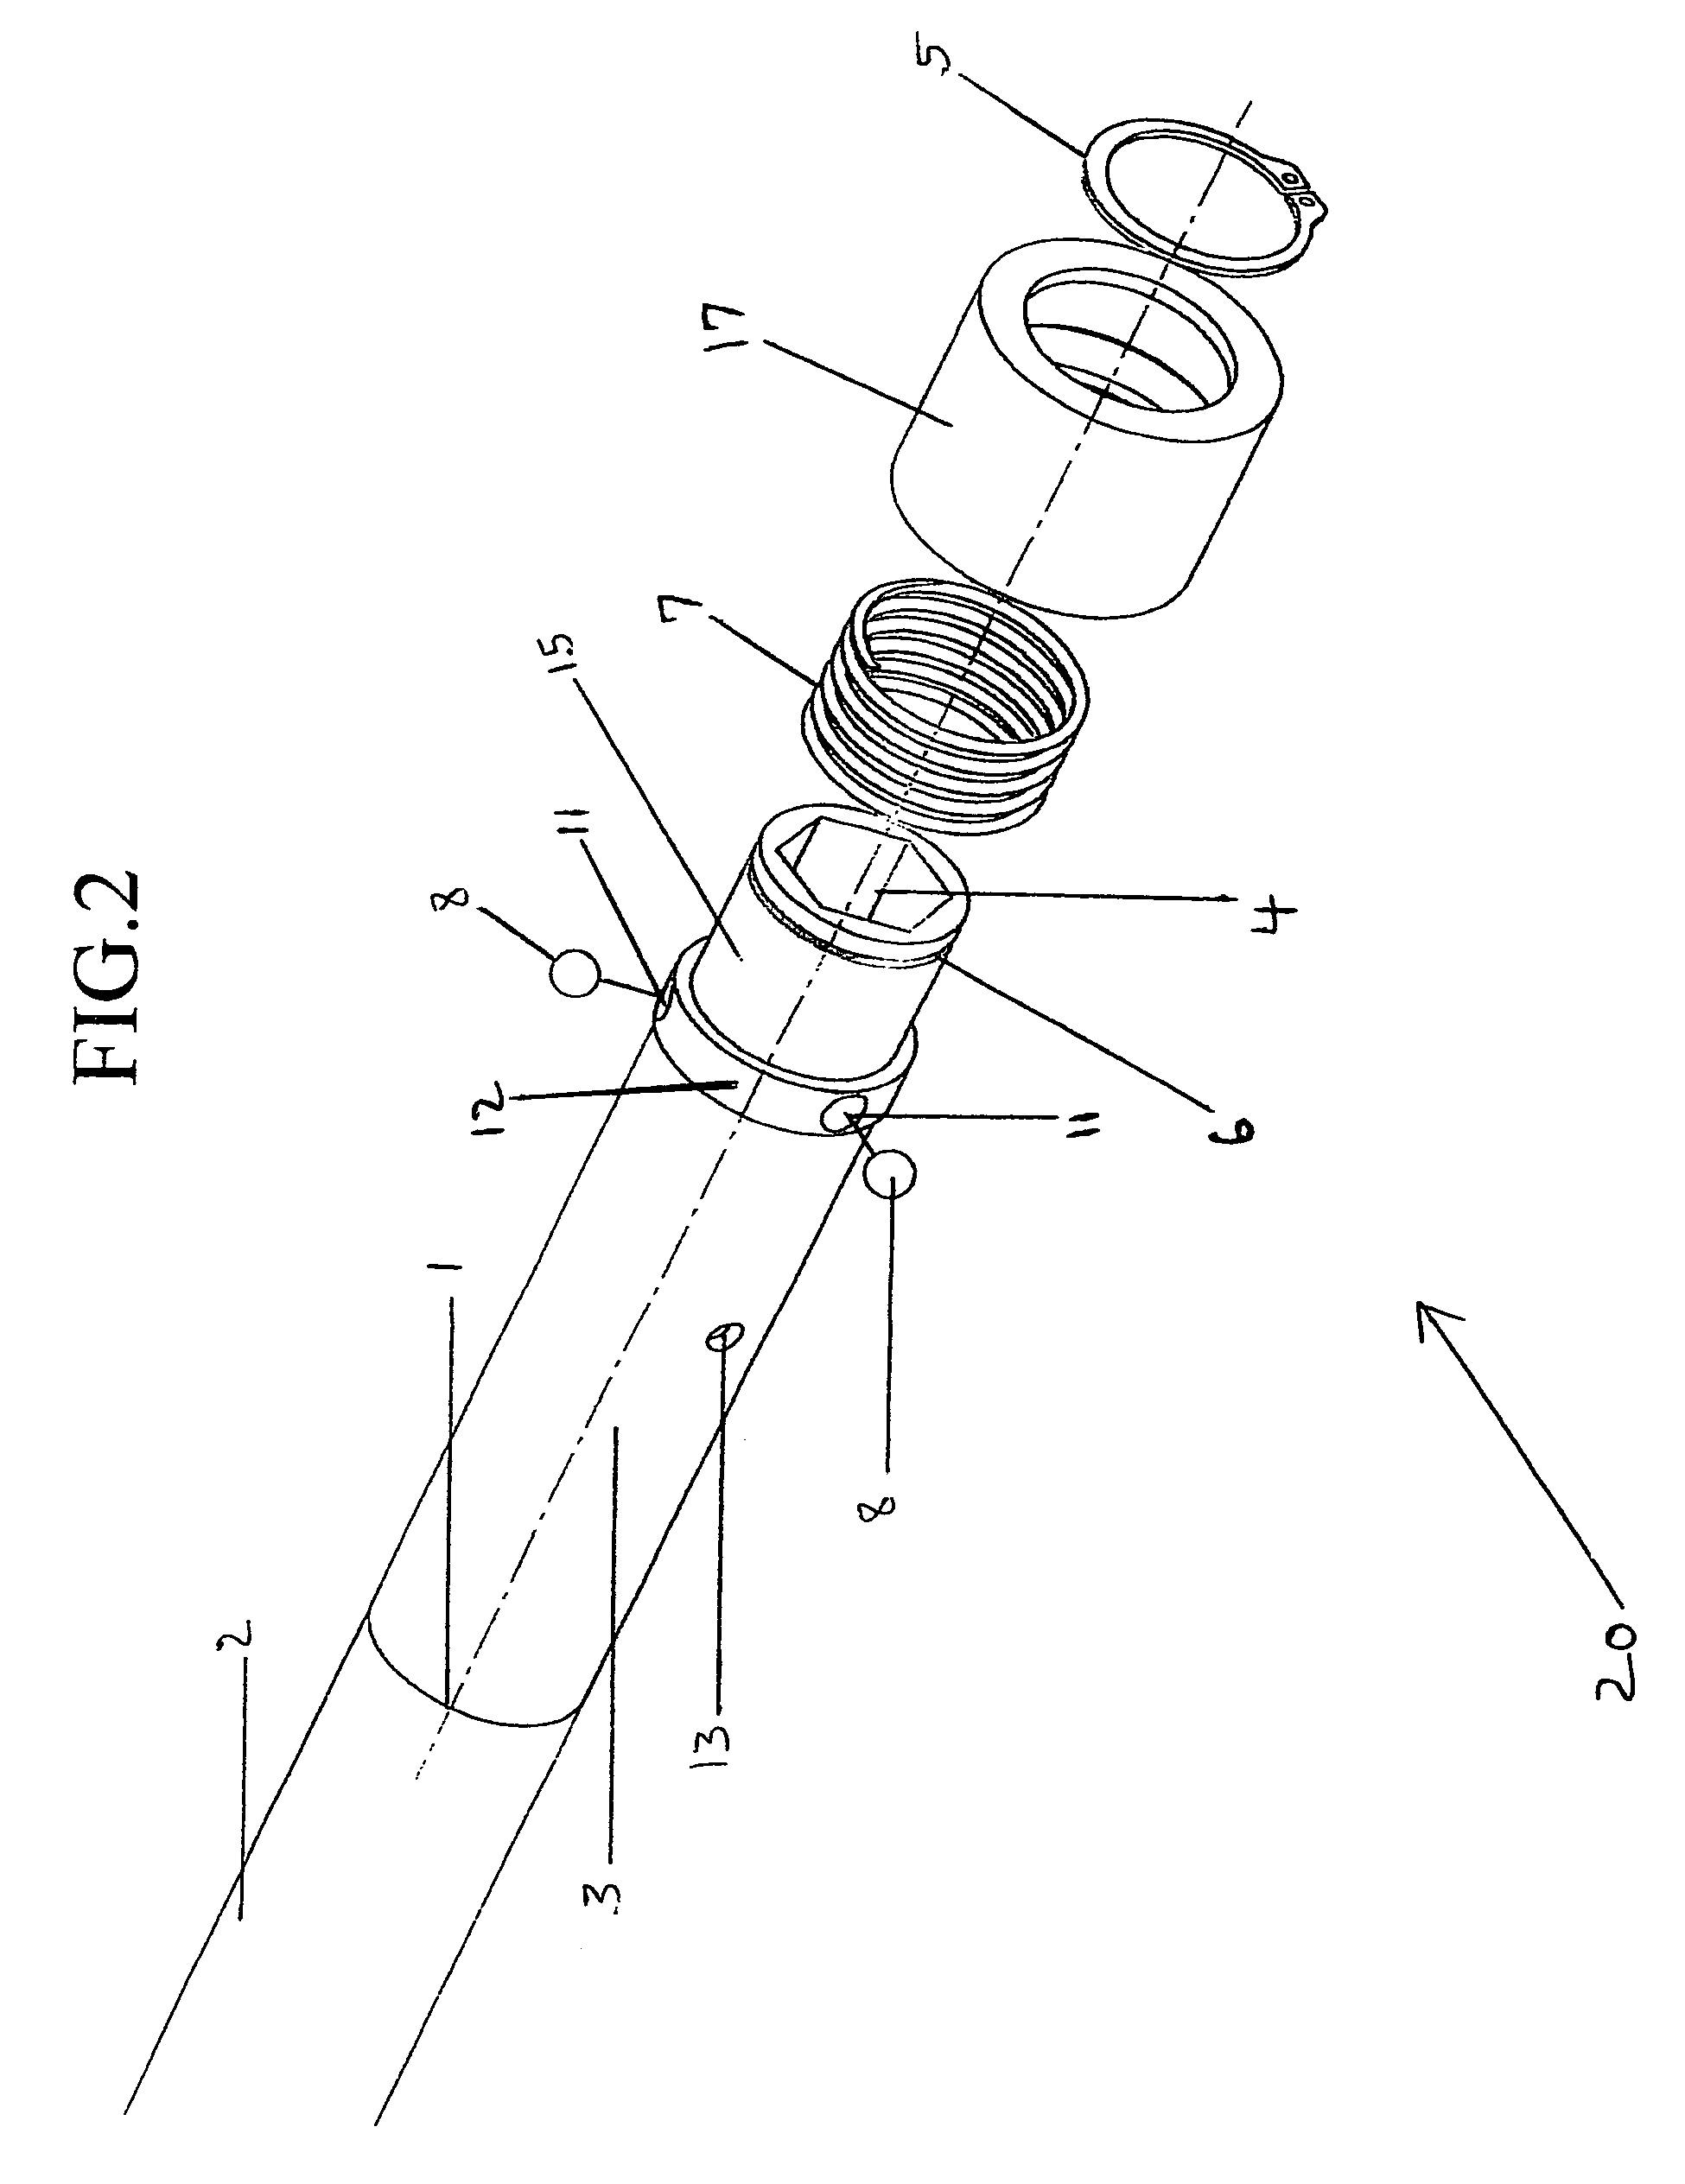 Quick disconnect coupling device